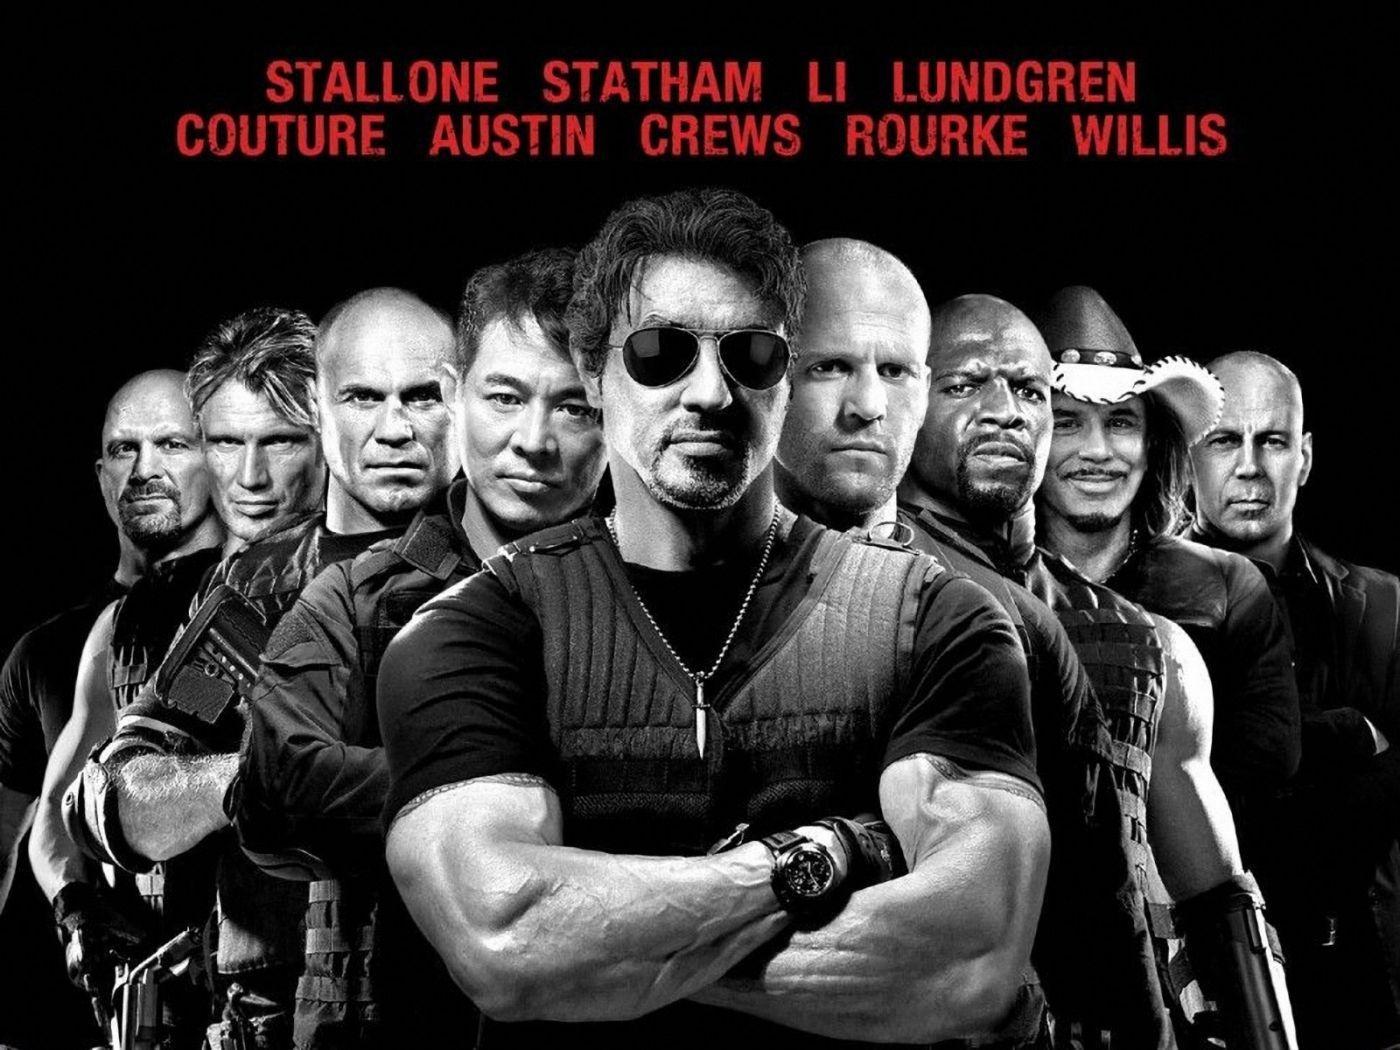 The Expendables 2 Wallpaper, The Expendables 2 Pics for Windows